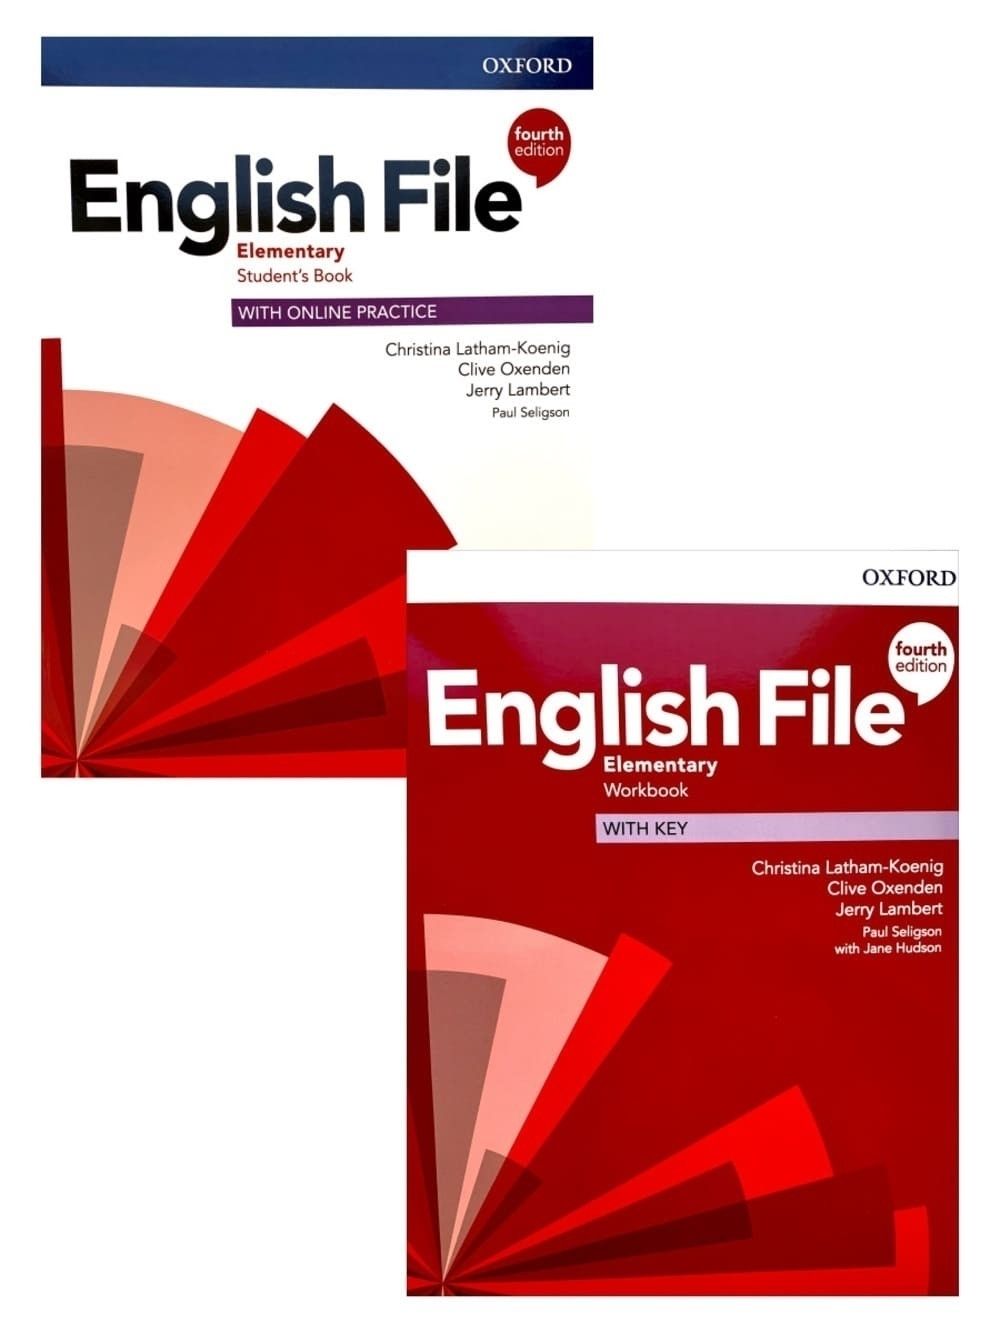 English file elementary 4. New English file Proficiency. Cambridge 18. Cambridge IELTS реклама. Book Cover for English students download.